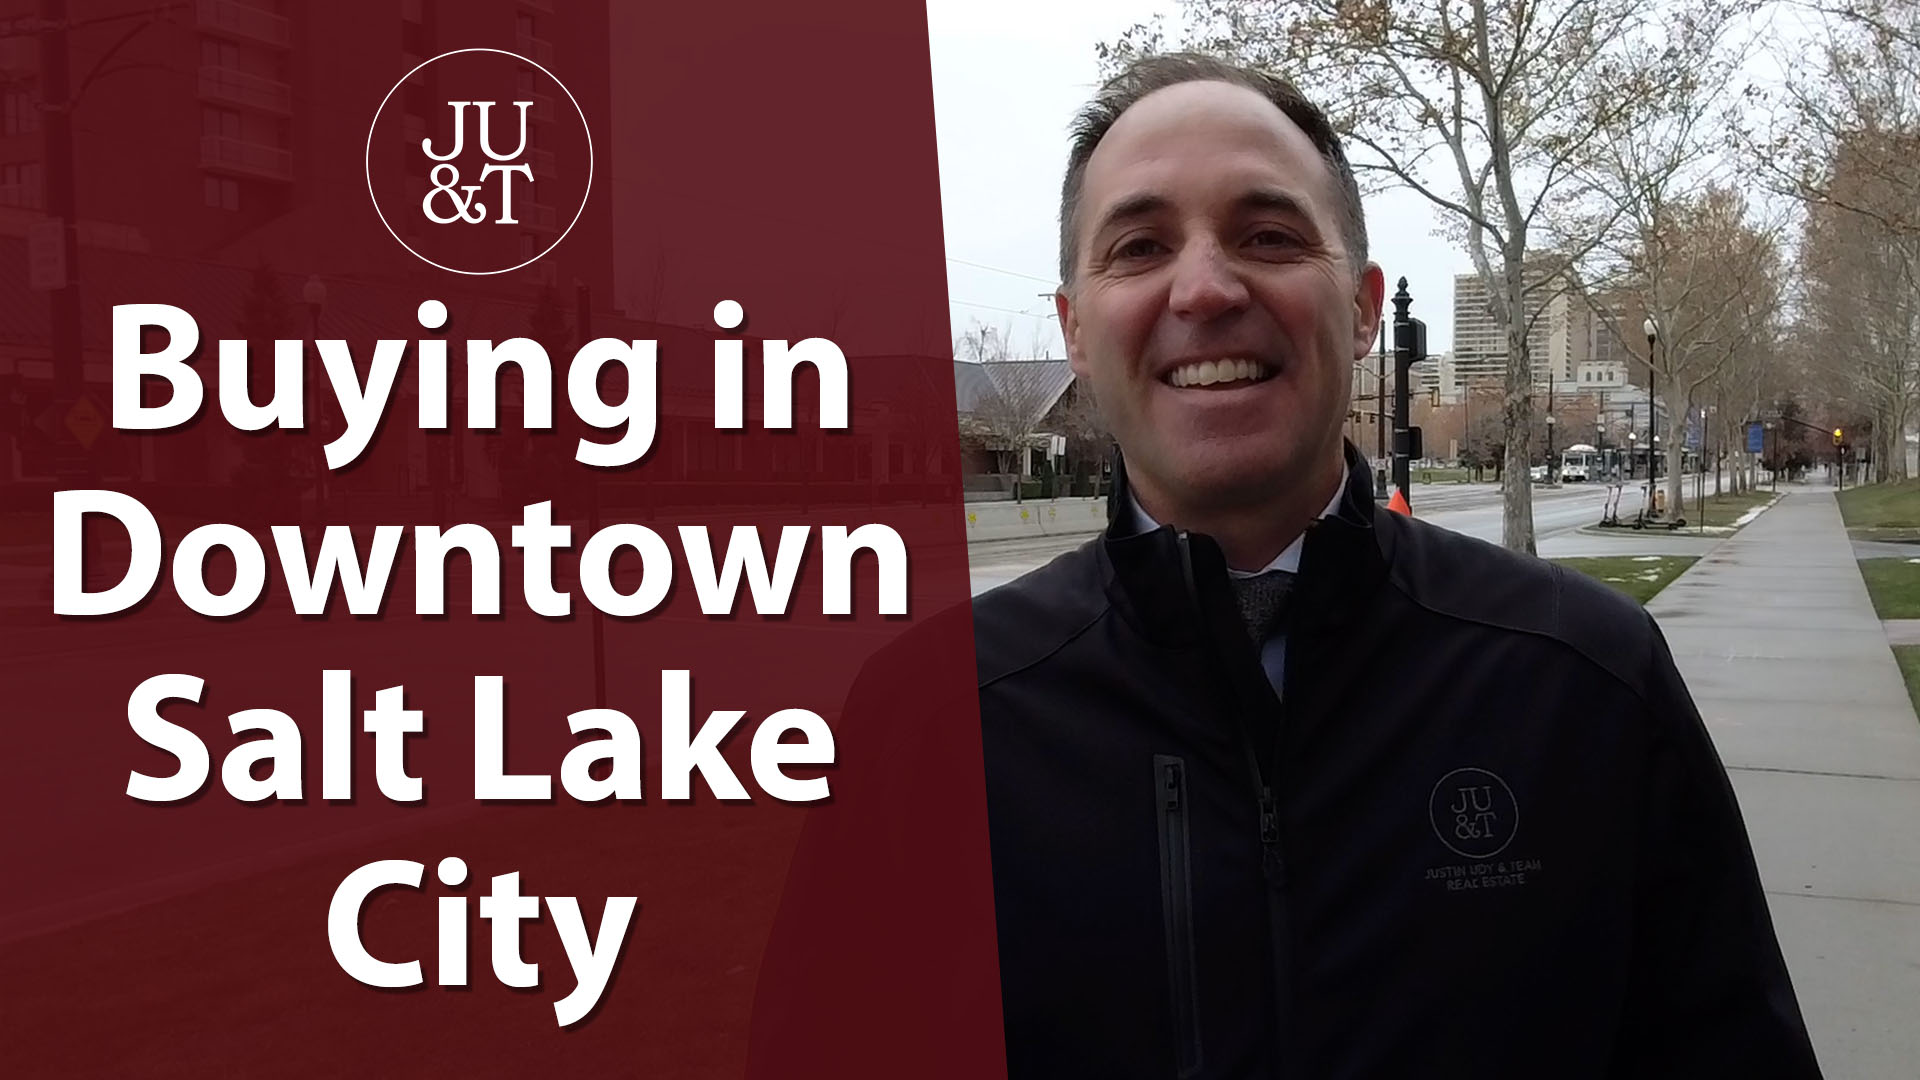 Q: What Are the Pros and Cons of Downtown Salt Lake City?